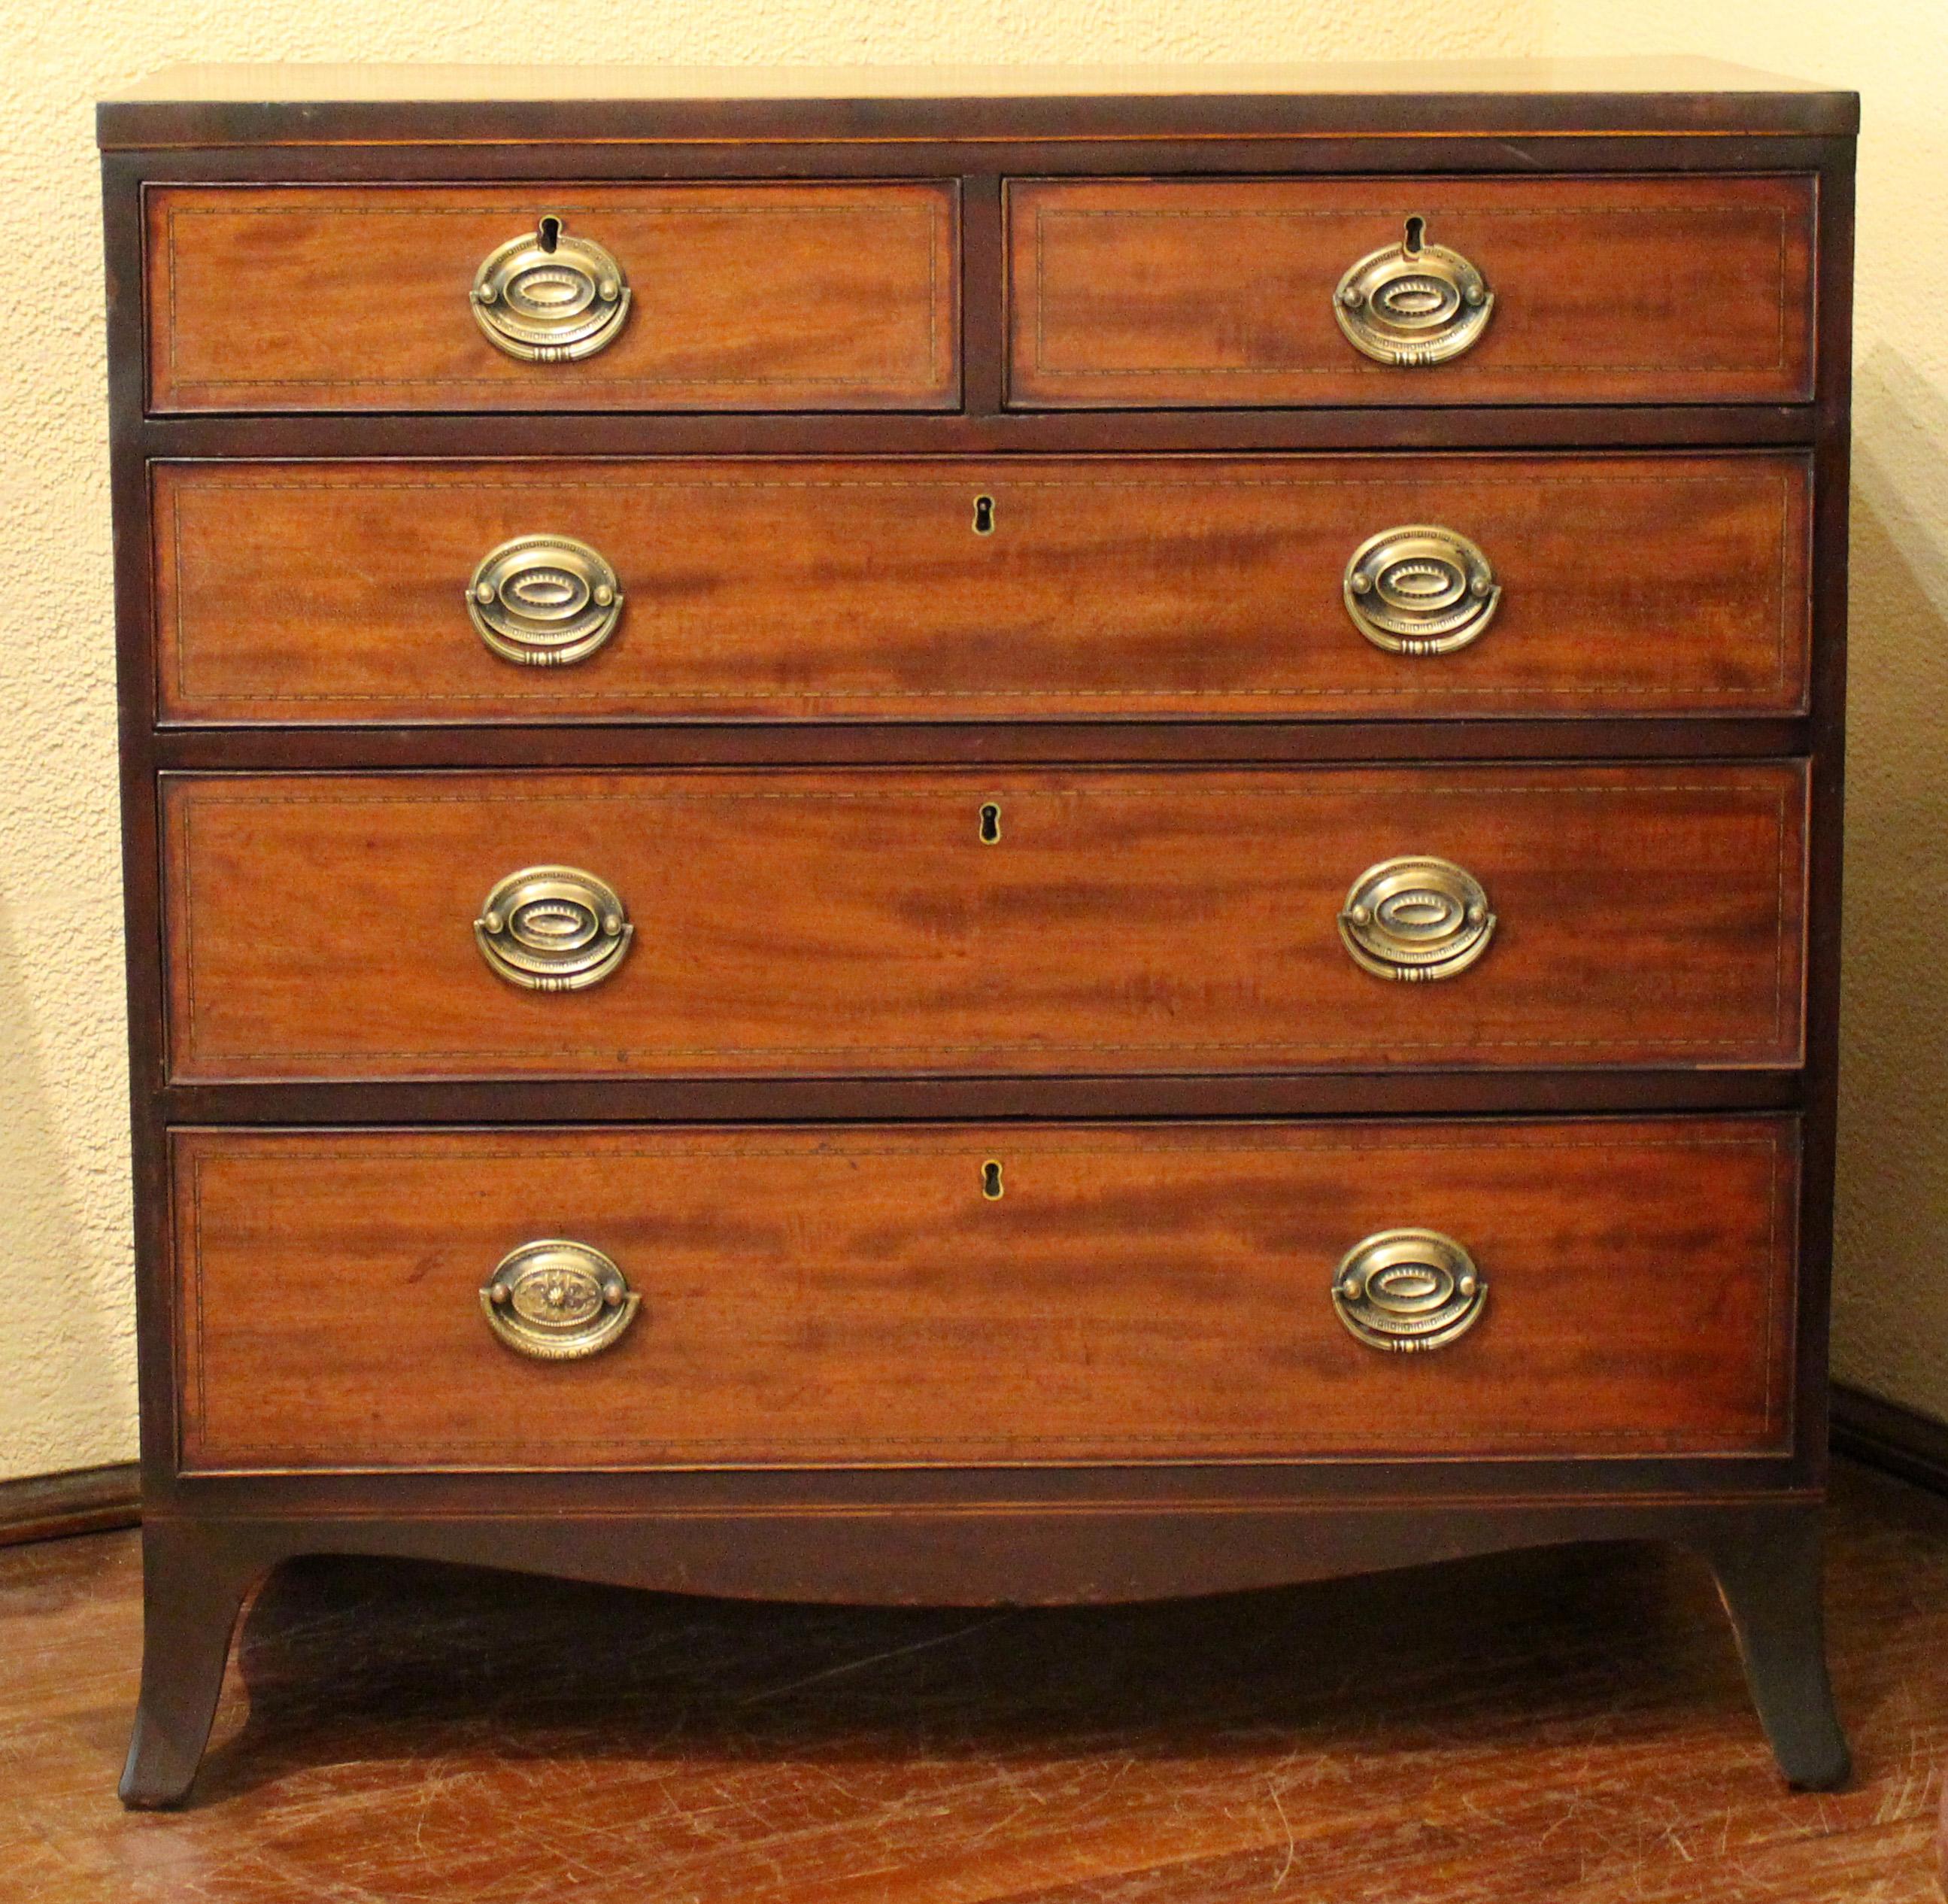 Georgian straight front chest of drawers, two short over three long, raised on French splay feet, shaped aprons. Mahogany with pine secondary wood. English, late 18th century. Caddy top with line inlaid edge. Drawer fronts with barberpole motif